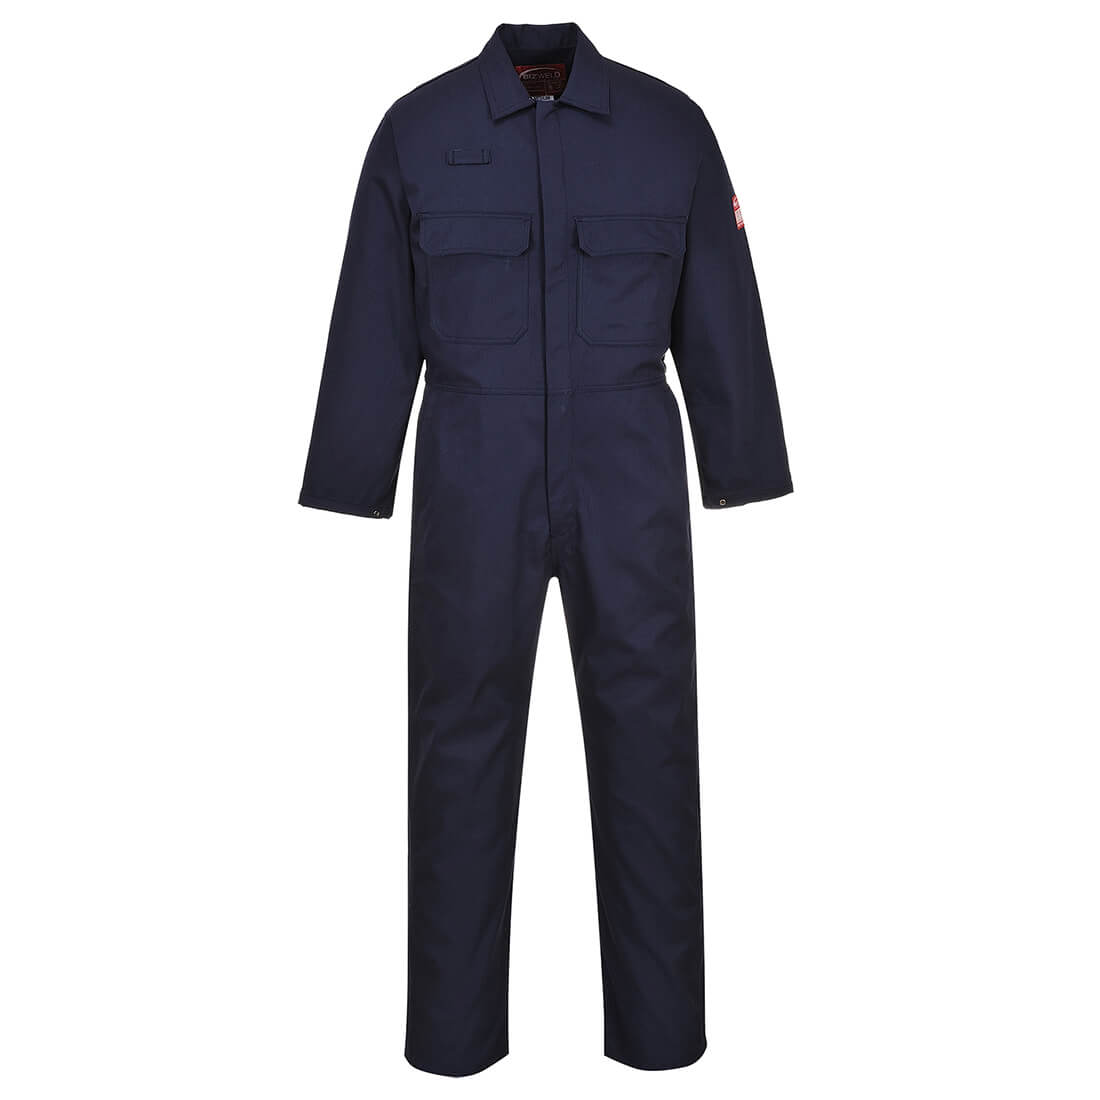 Image of Biz Weld Mens Flame Resistant Overall Navy Blue 2XL 34"